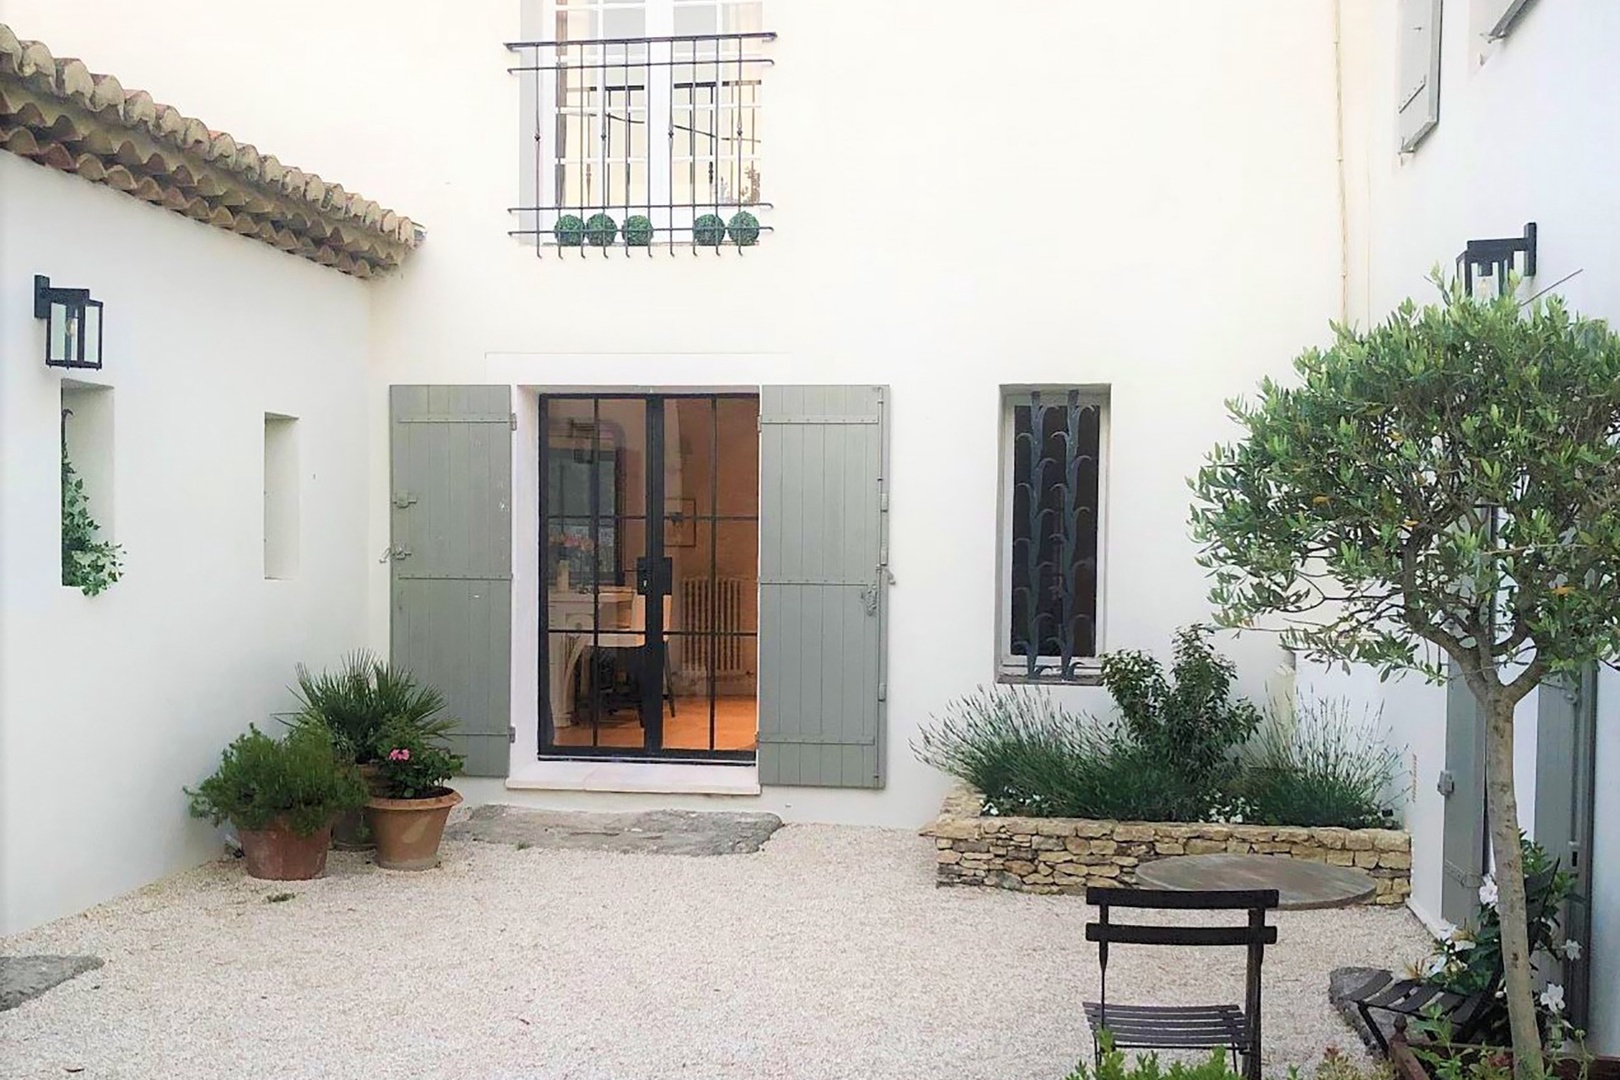 Courtyard entrance to kitchen (left) and Petite Maison (right)